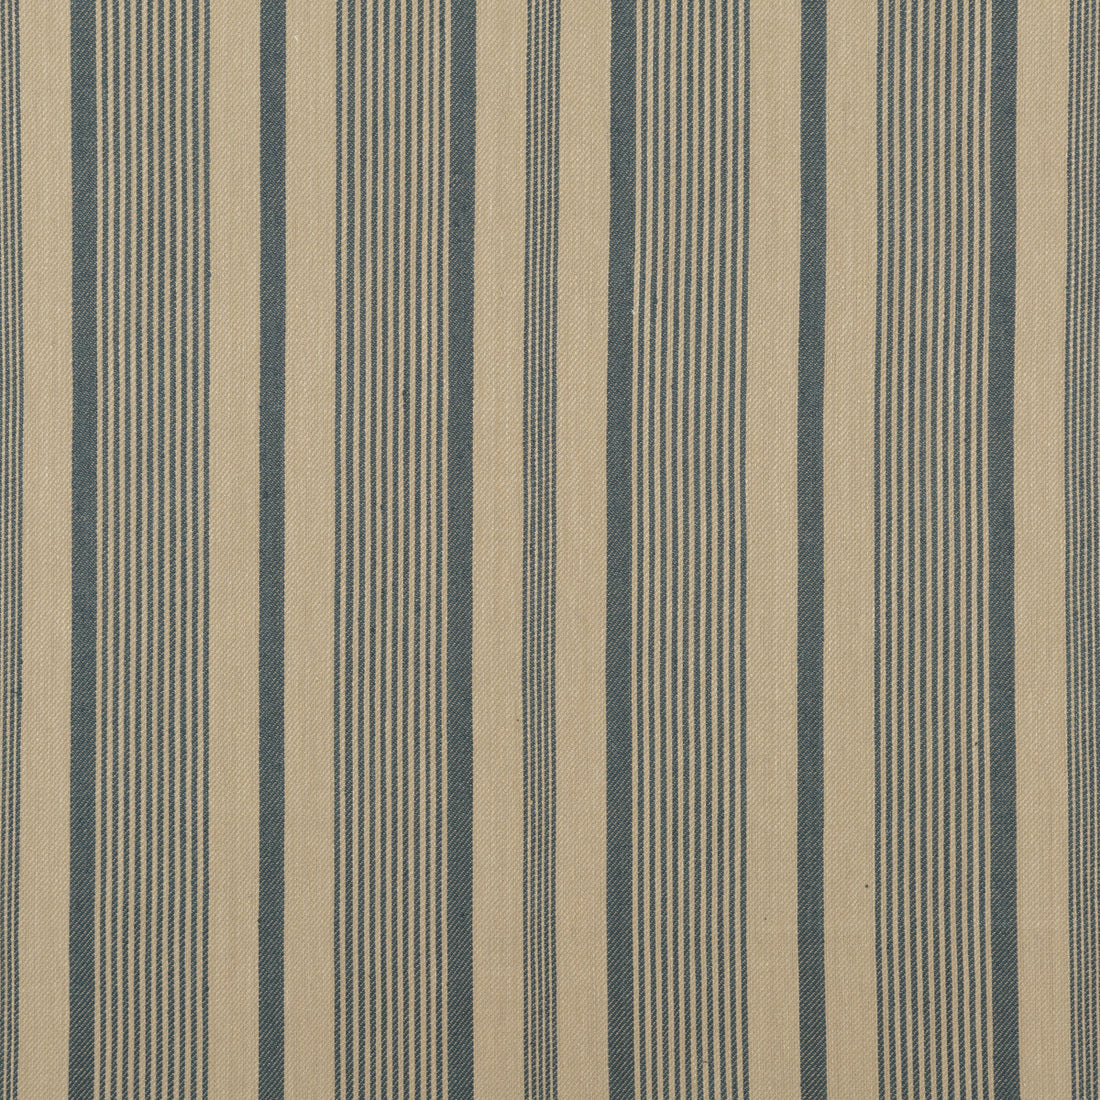 College Stripe fabric in teal/linen color - pattern FD758.R30.0 - by Mulberry in the Festival collection